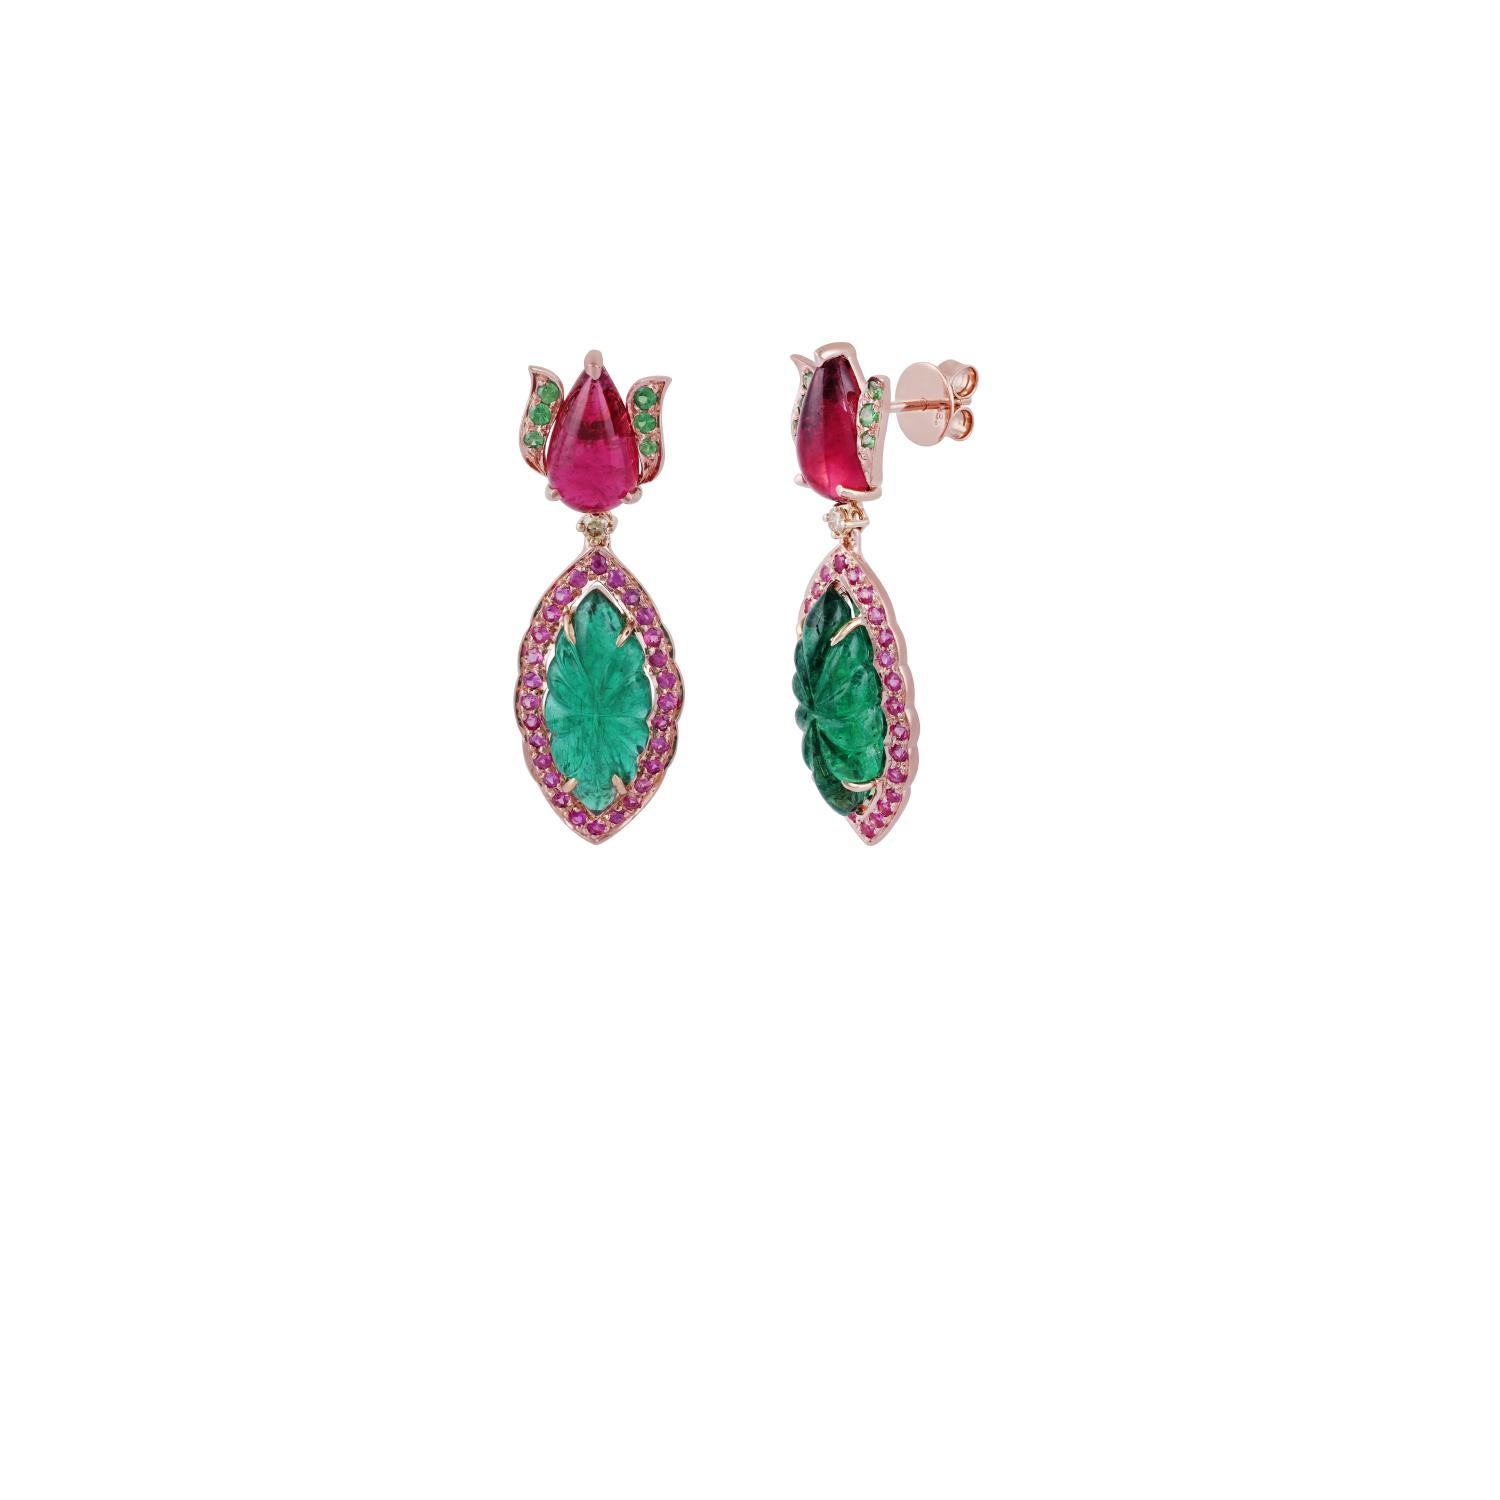 Leaf carved Emeralds 10.10 carats, adorned by 1.06 carats of round Pink Sapphires on sides; crowned by lotus motif with Pear shaped cabochon Rubellite tourmalines weighing 5.70 carats with 0.29 carat of Tsavorite on sides; round Yellow Diamonds 0.09